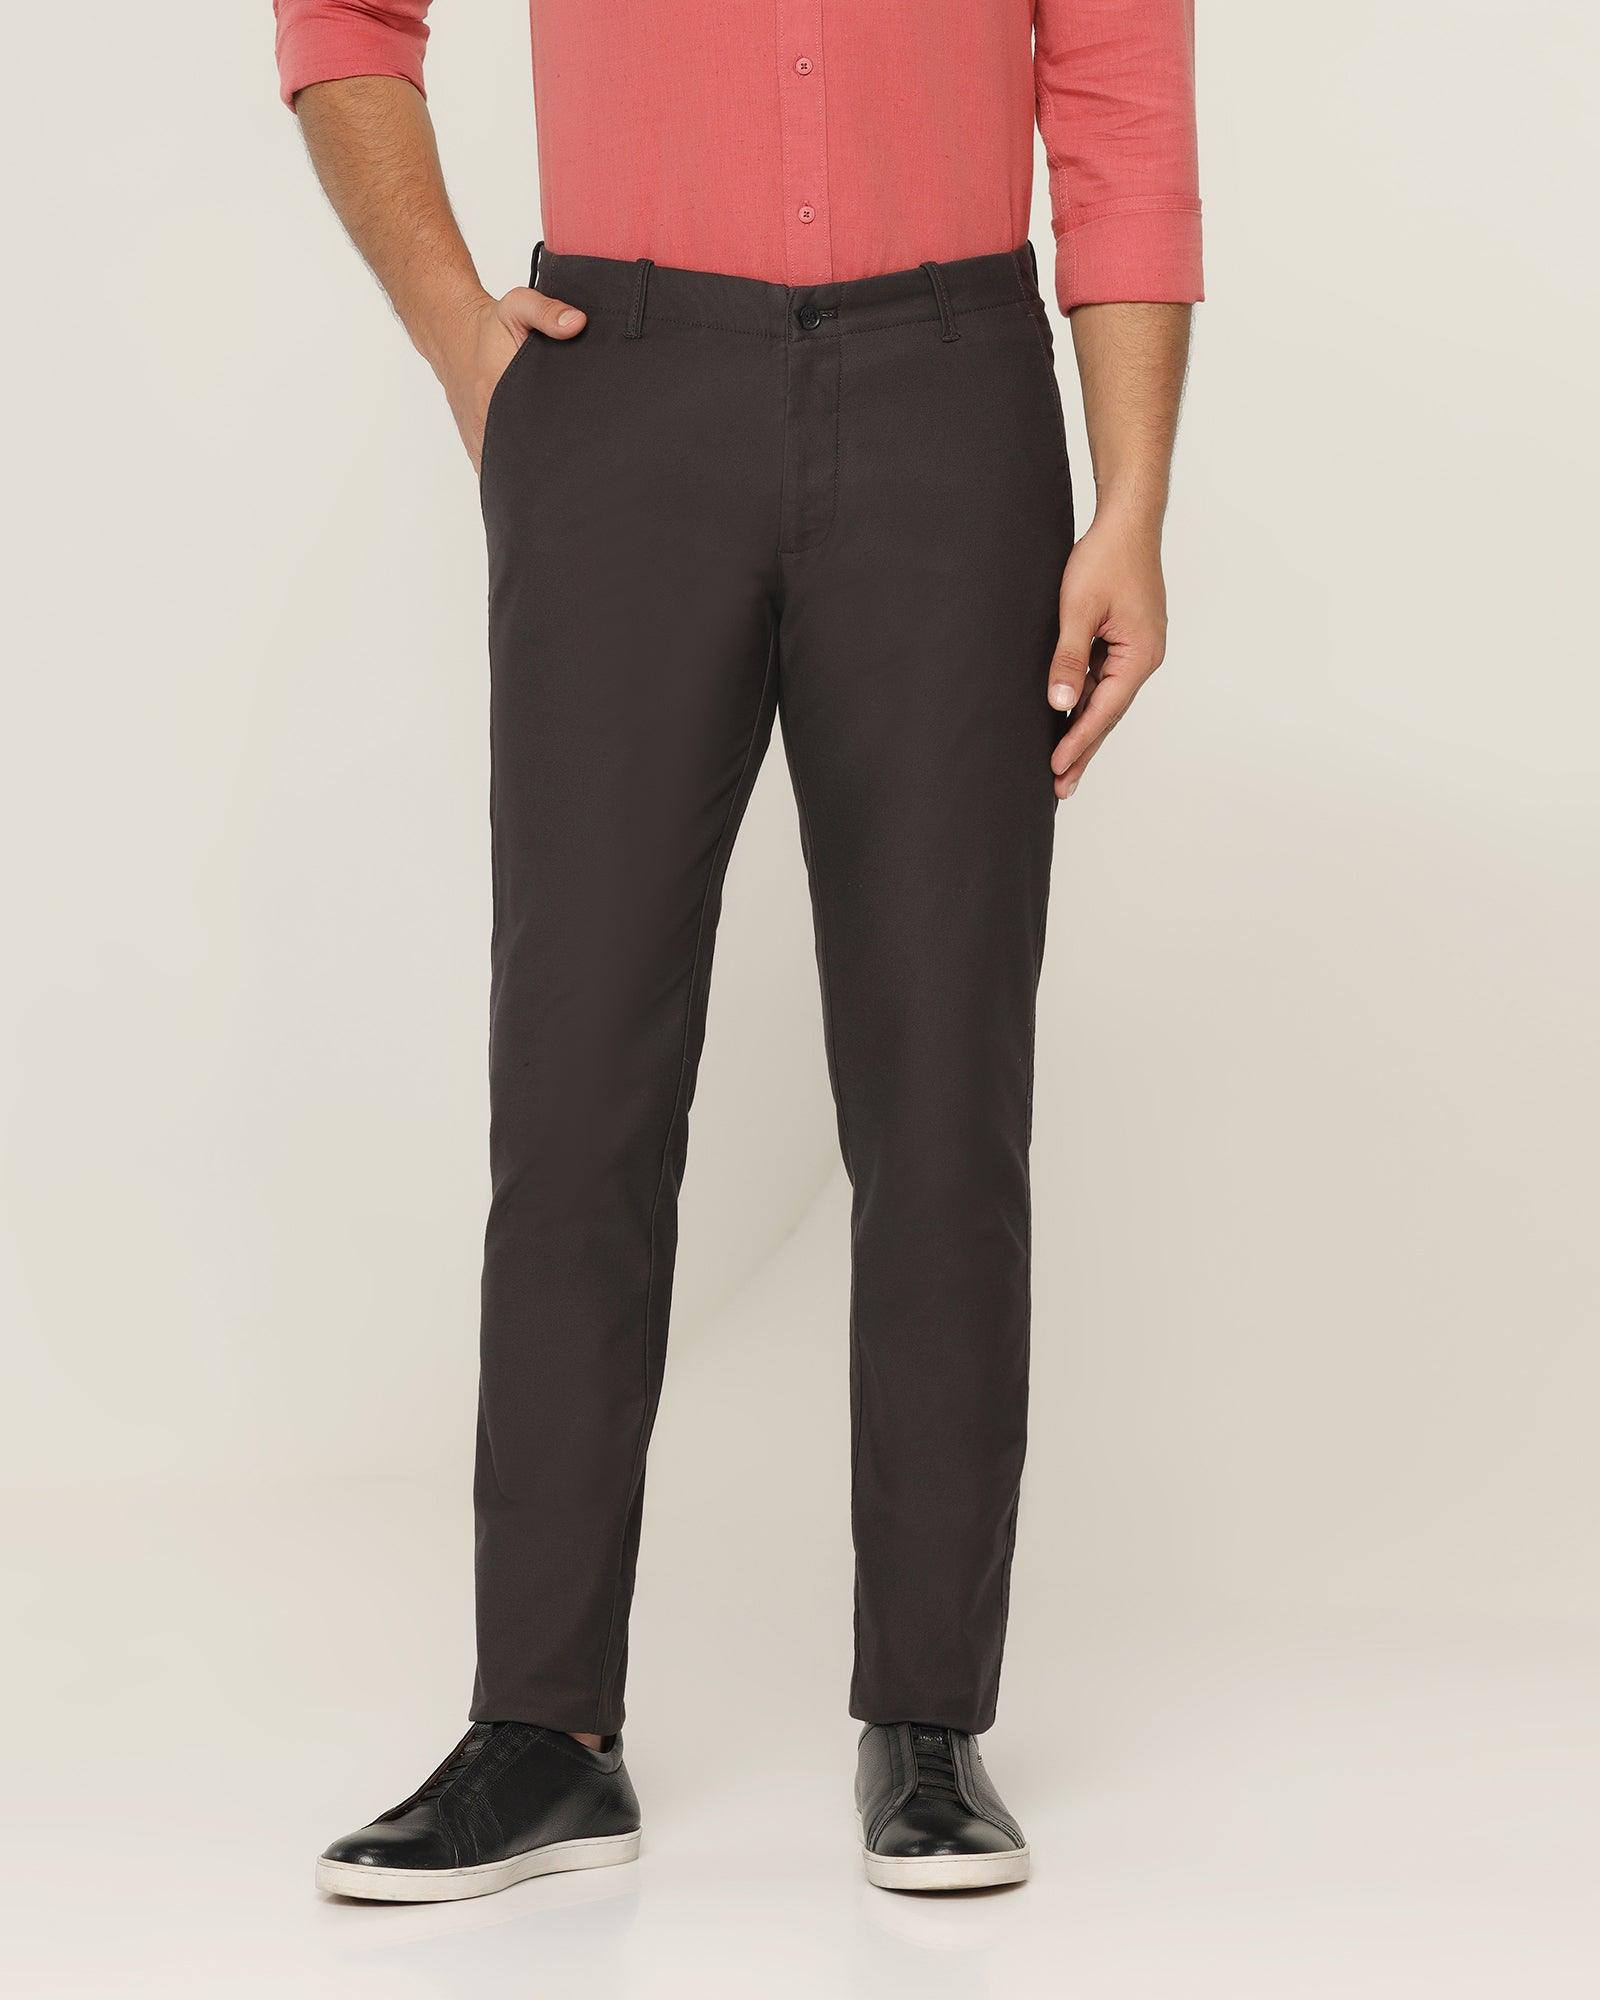 Slim Fit B-91 Casual Charcoal Textured Khakis - Segy